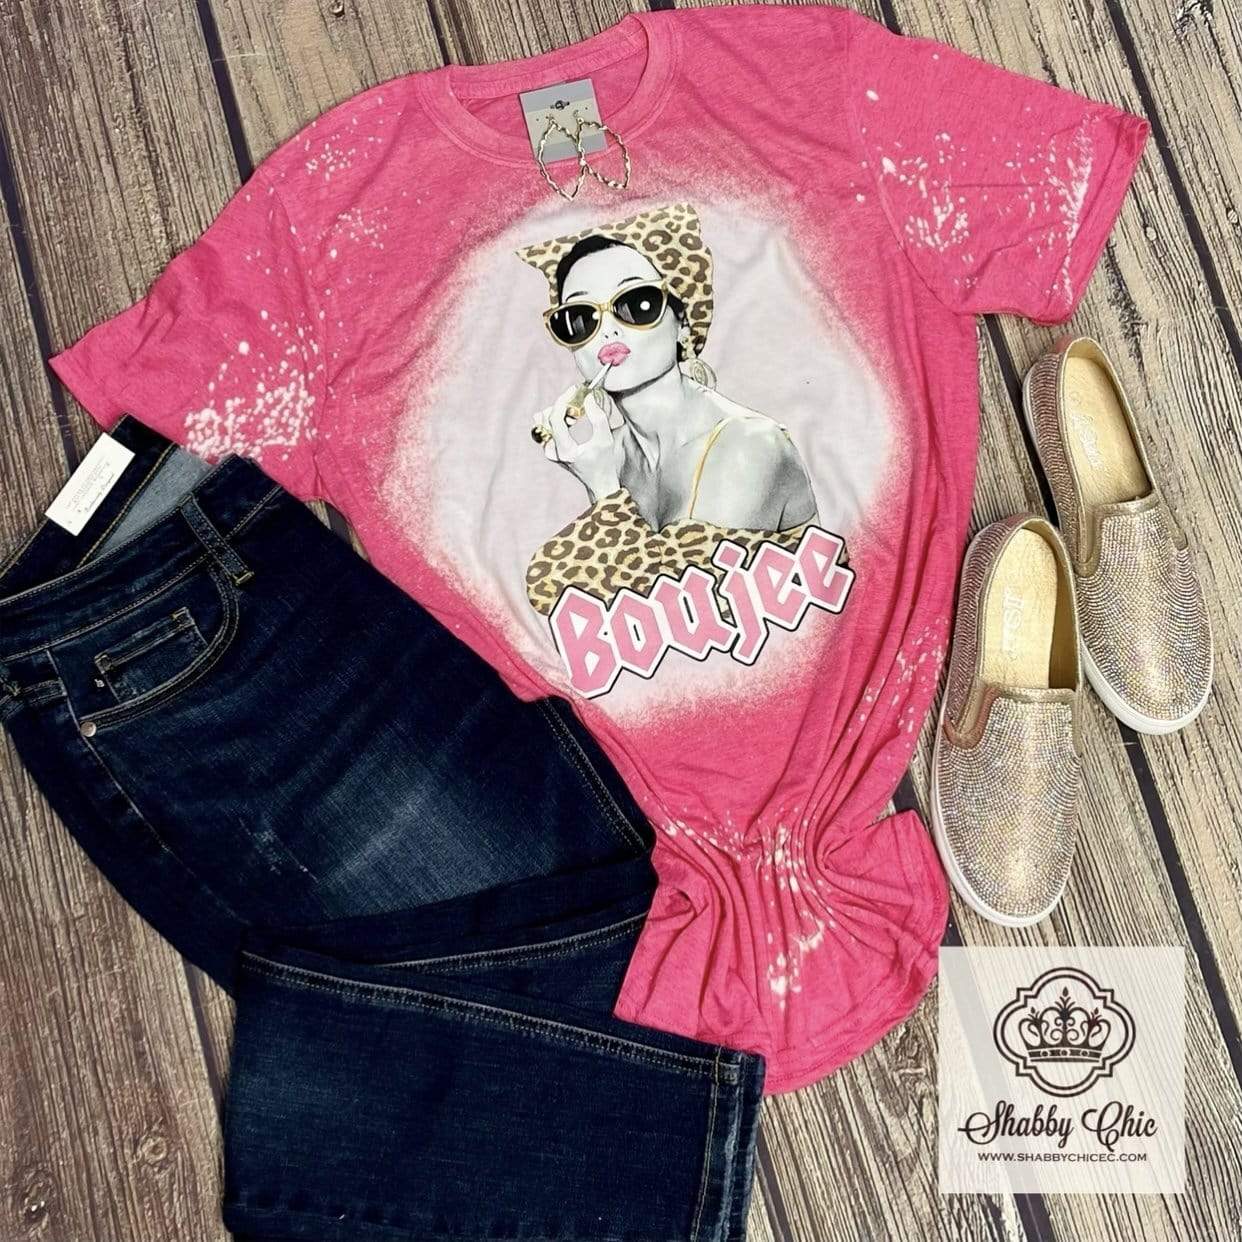 Boujee Lady Tee Shabby Chic Boutique and Tanning Salon